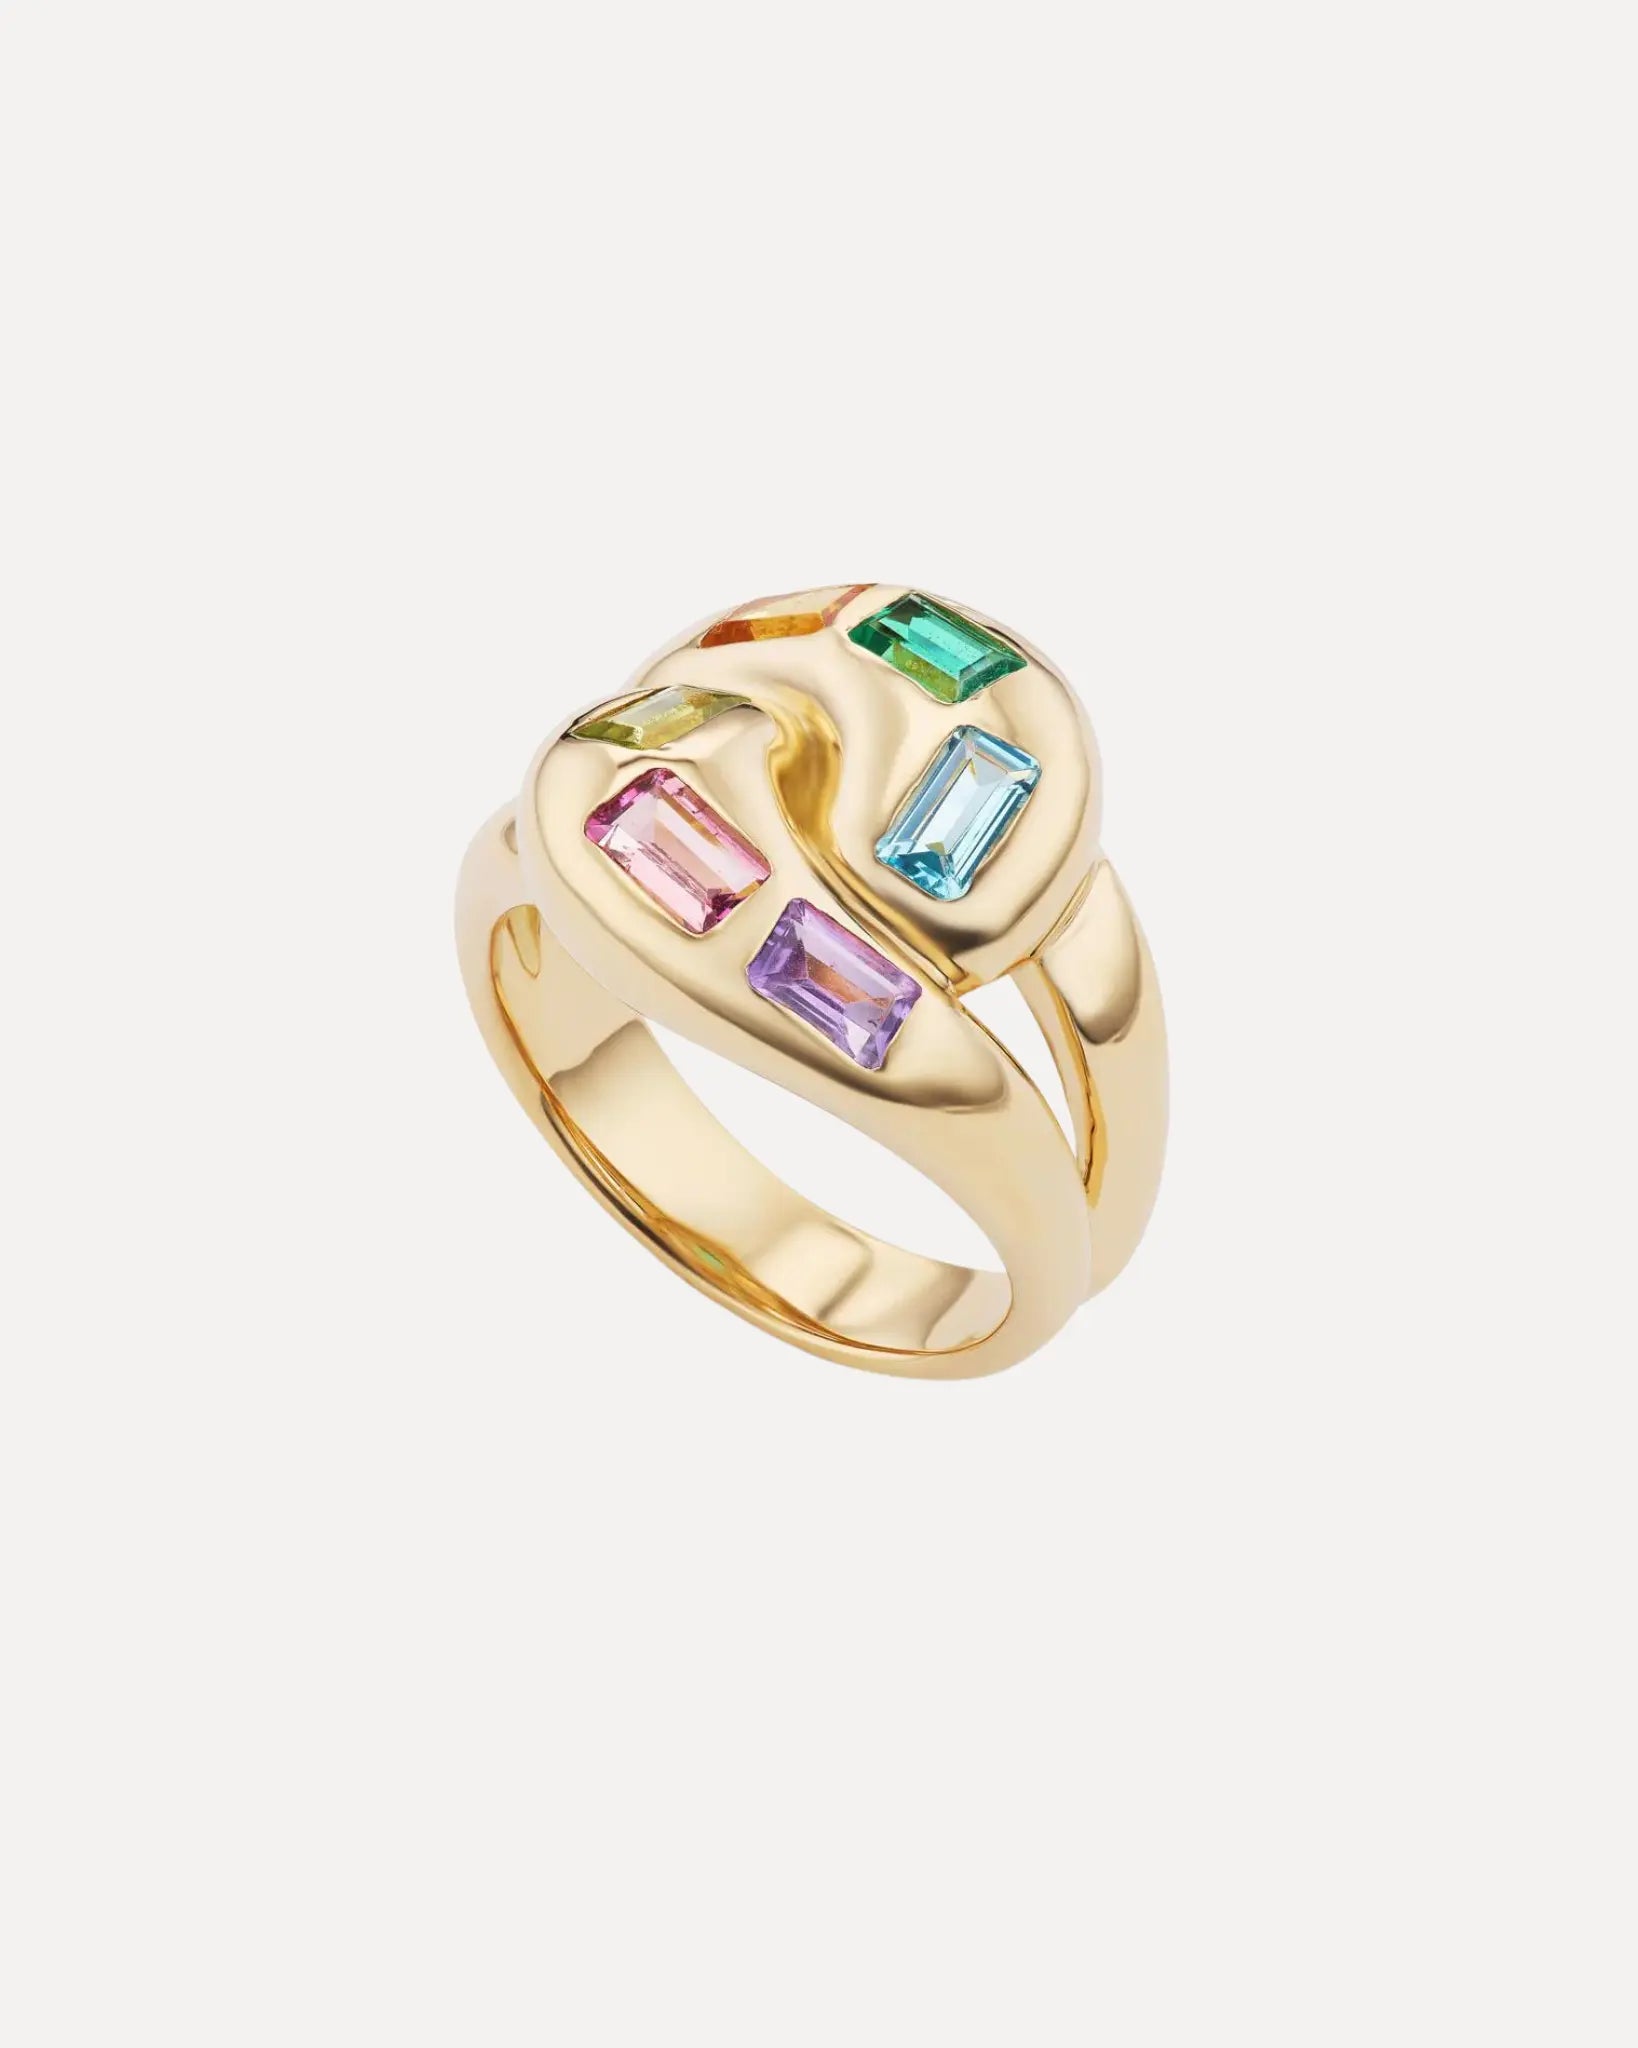 Knot Ring with Multi-Colored Gemstones Knot Ring with Multi-Colored Gemstones Brent Neale Brent Neale  Squash Blossom Vail